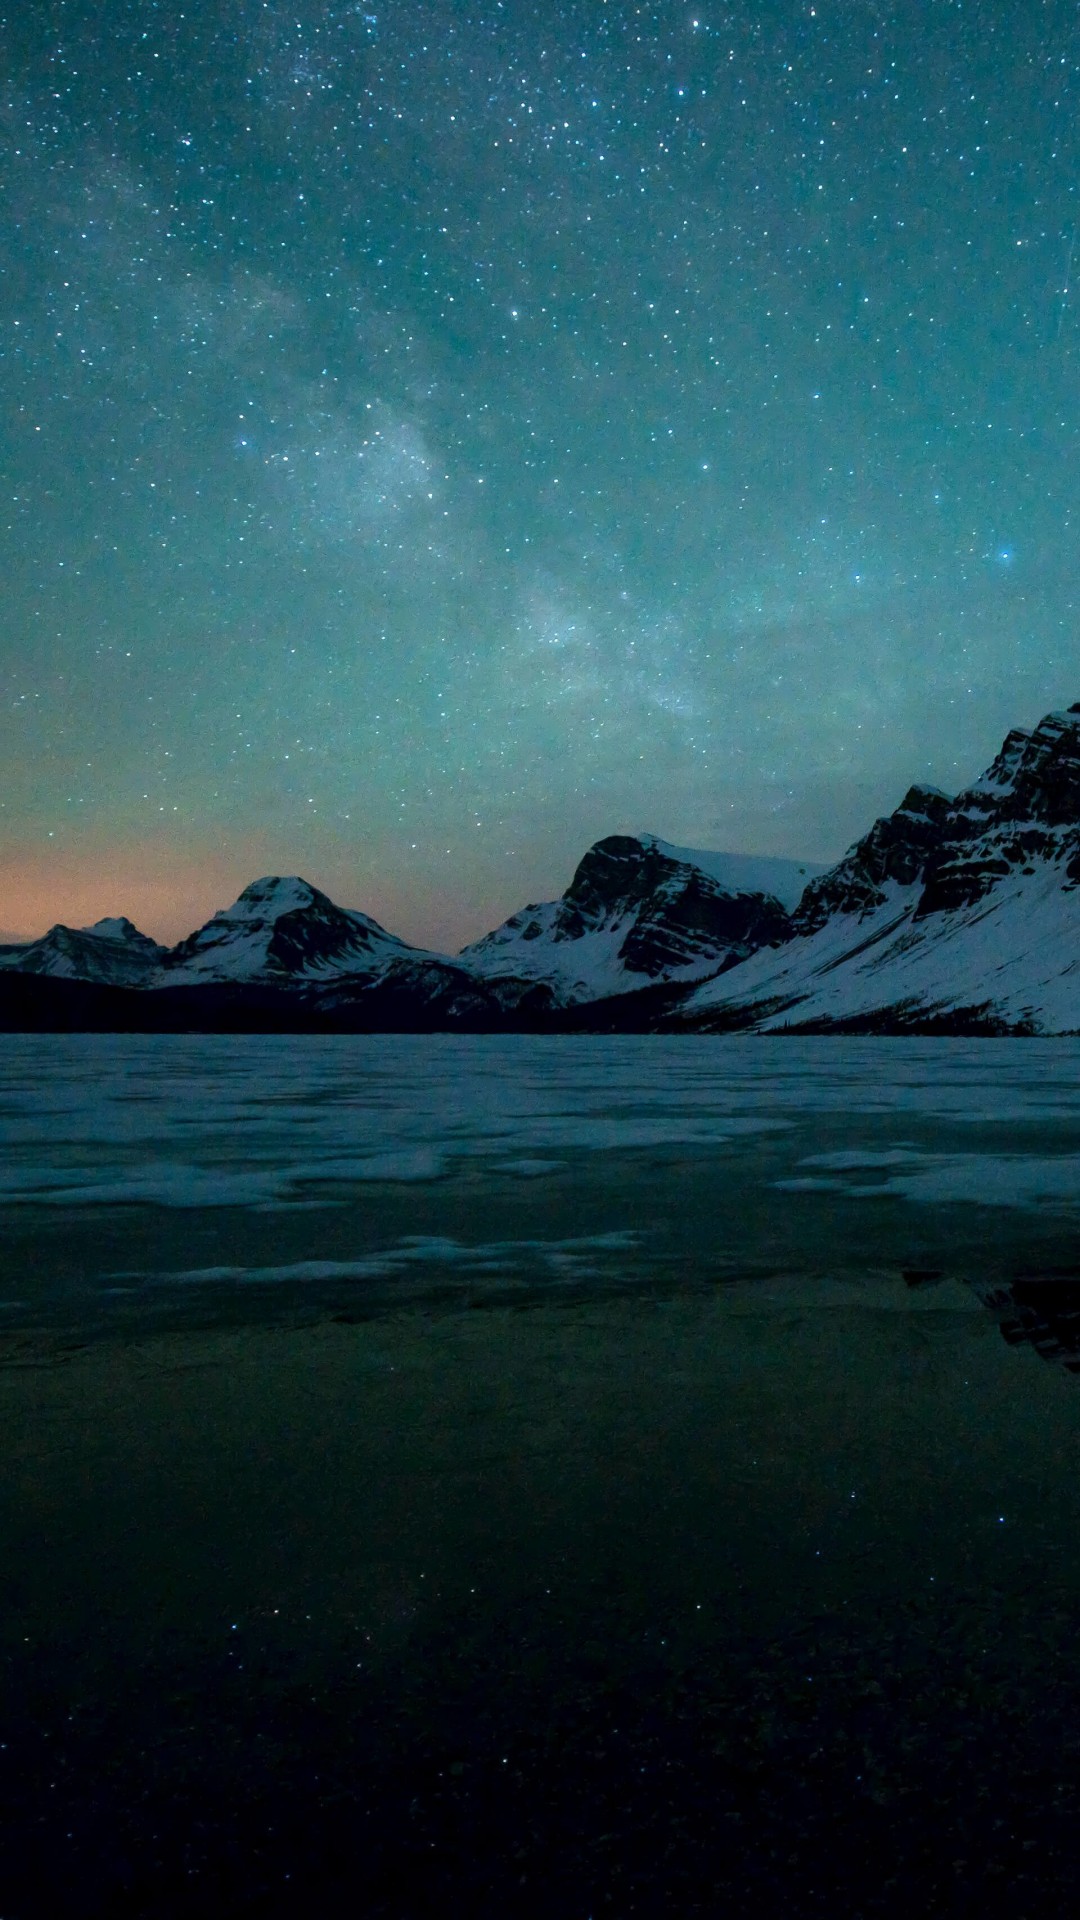 Milky Way over Bow Lake, Alberta, Canada Wallpaper for LG G2